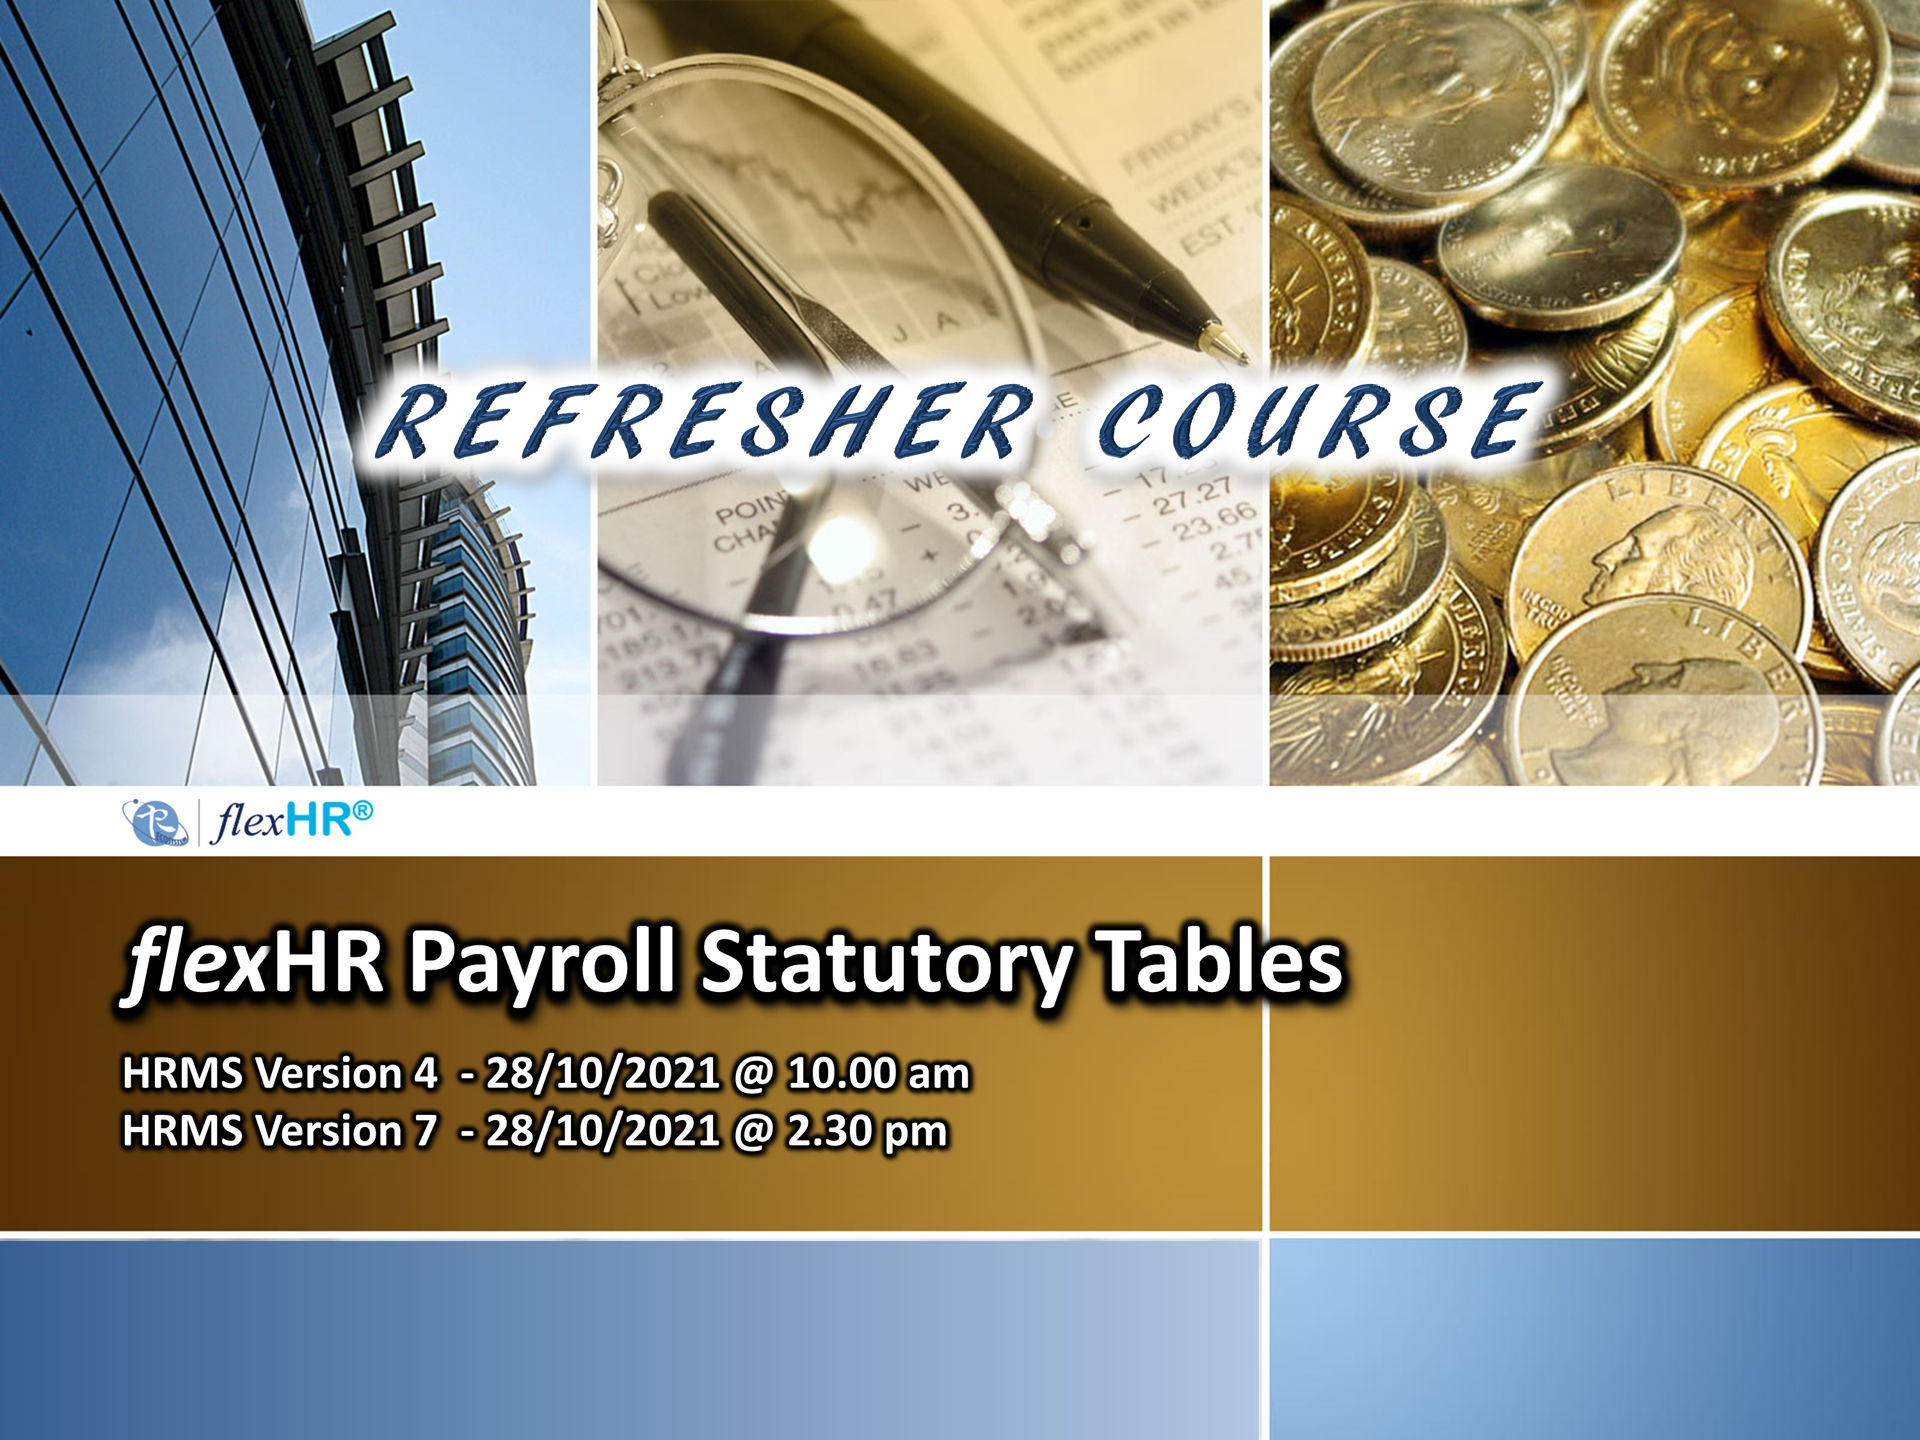 Picture of Refresher Course - Payroll Statutory Tables